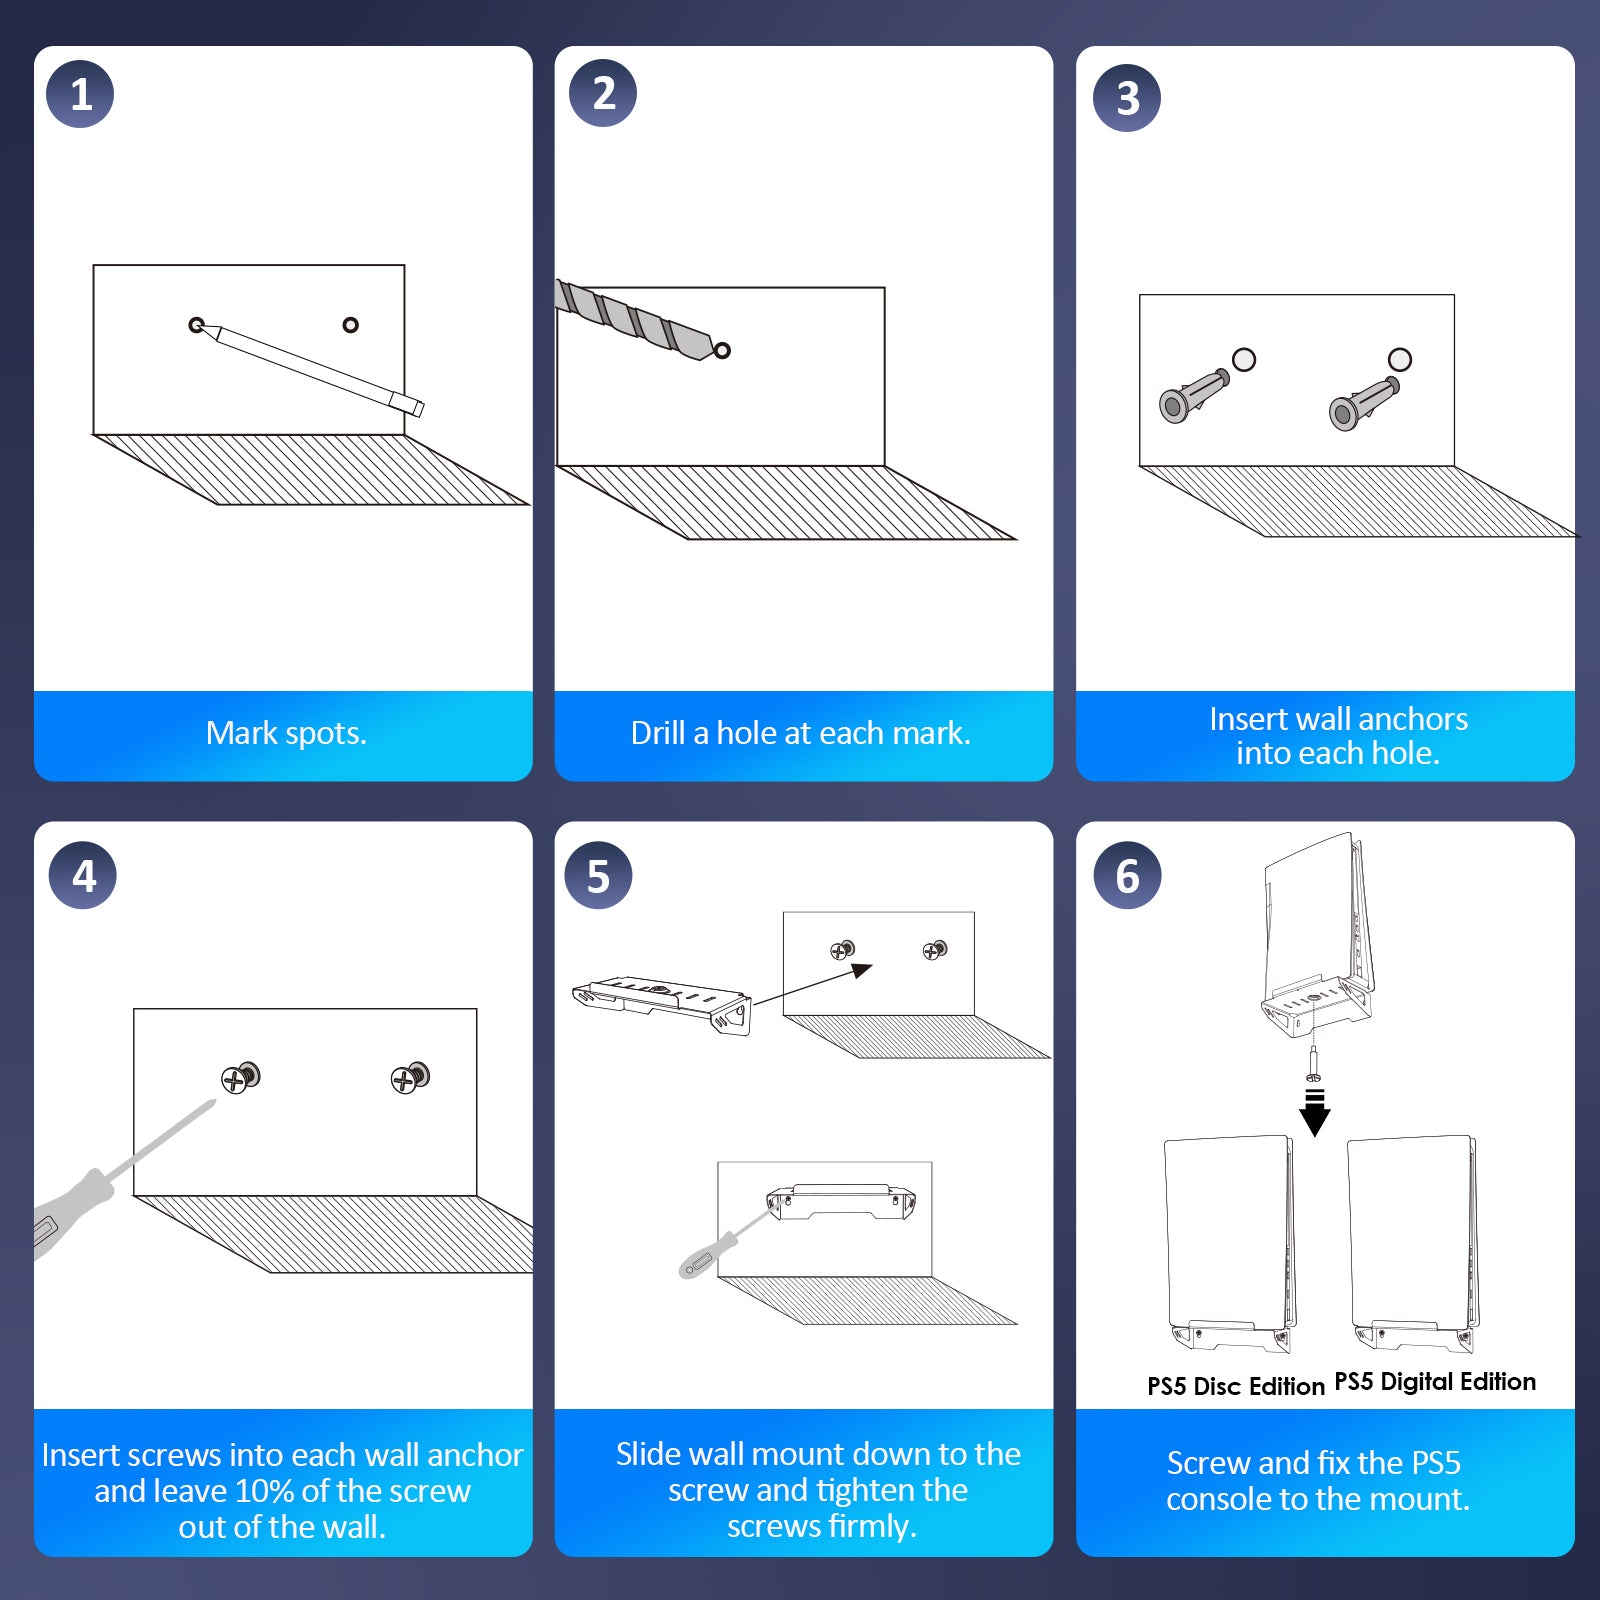 Steel Wall Stand installation tutorial, using screw and wall anchor